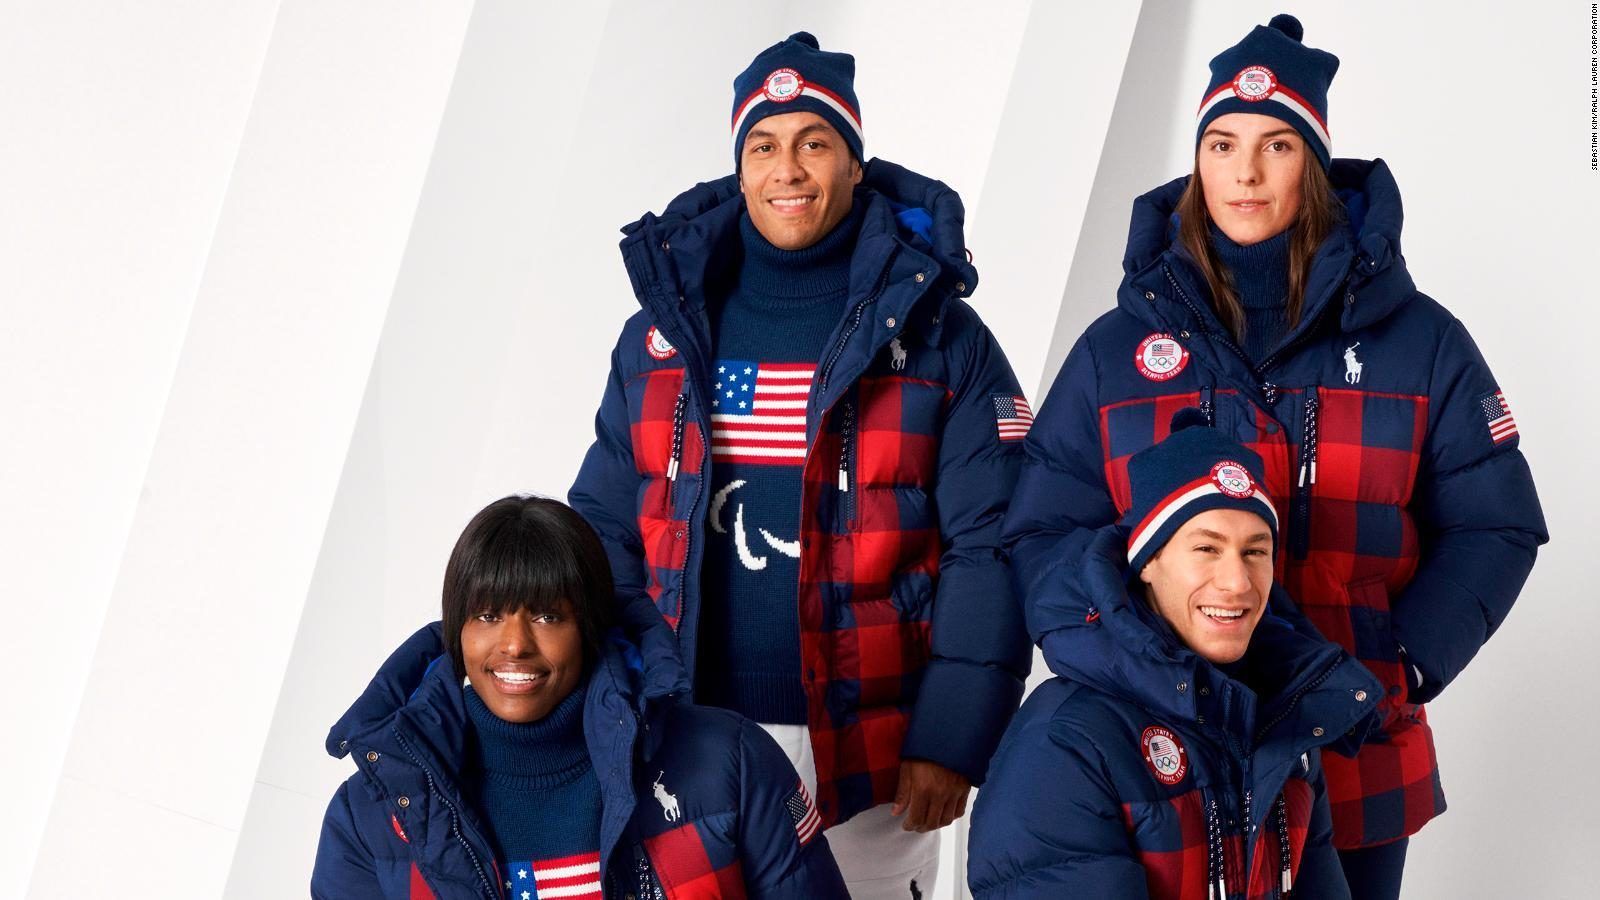 Winter Olympics Uniforms 2022: Team Outfits and the Brands Who Designed Them